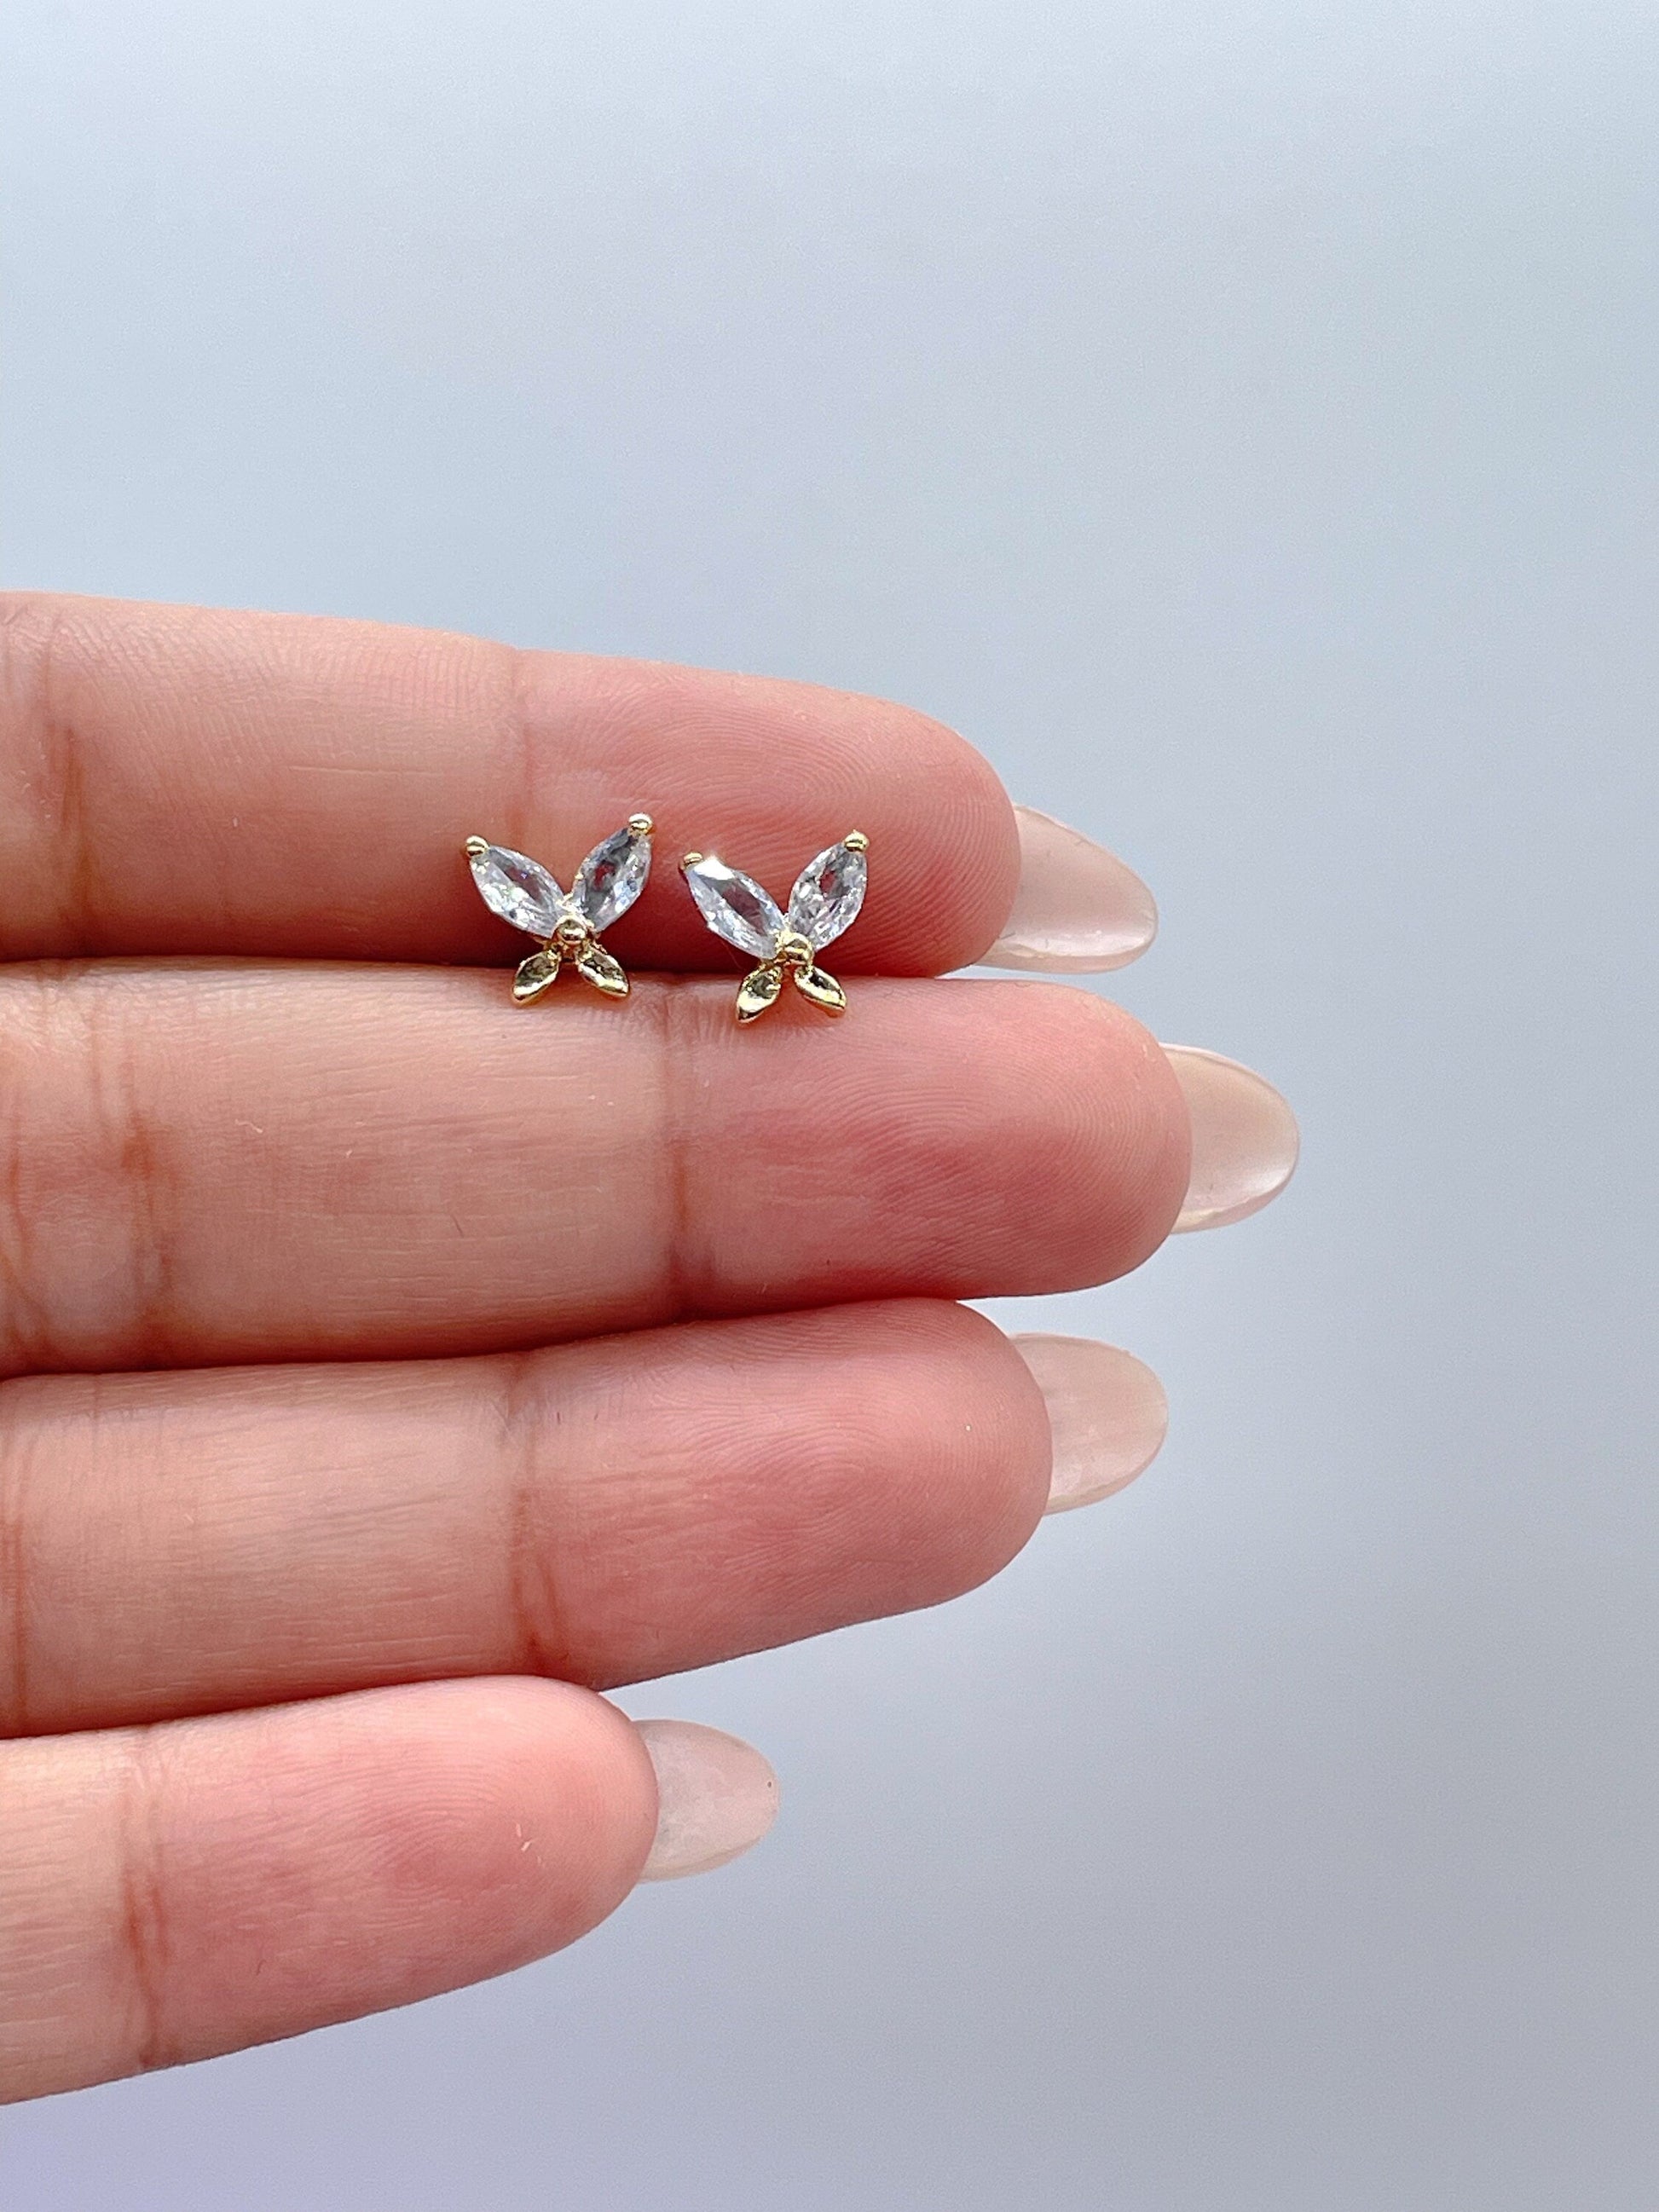 18k Gold Filled Dainty Butterly Stud Earrings With Top Marquise Cut Stone Earrings, Butterfly Studs, Dainty Stud,